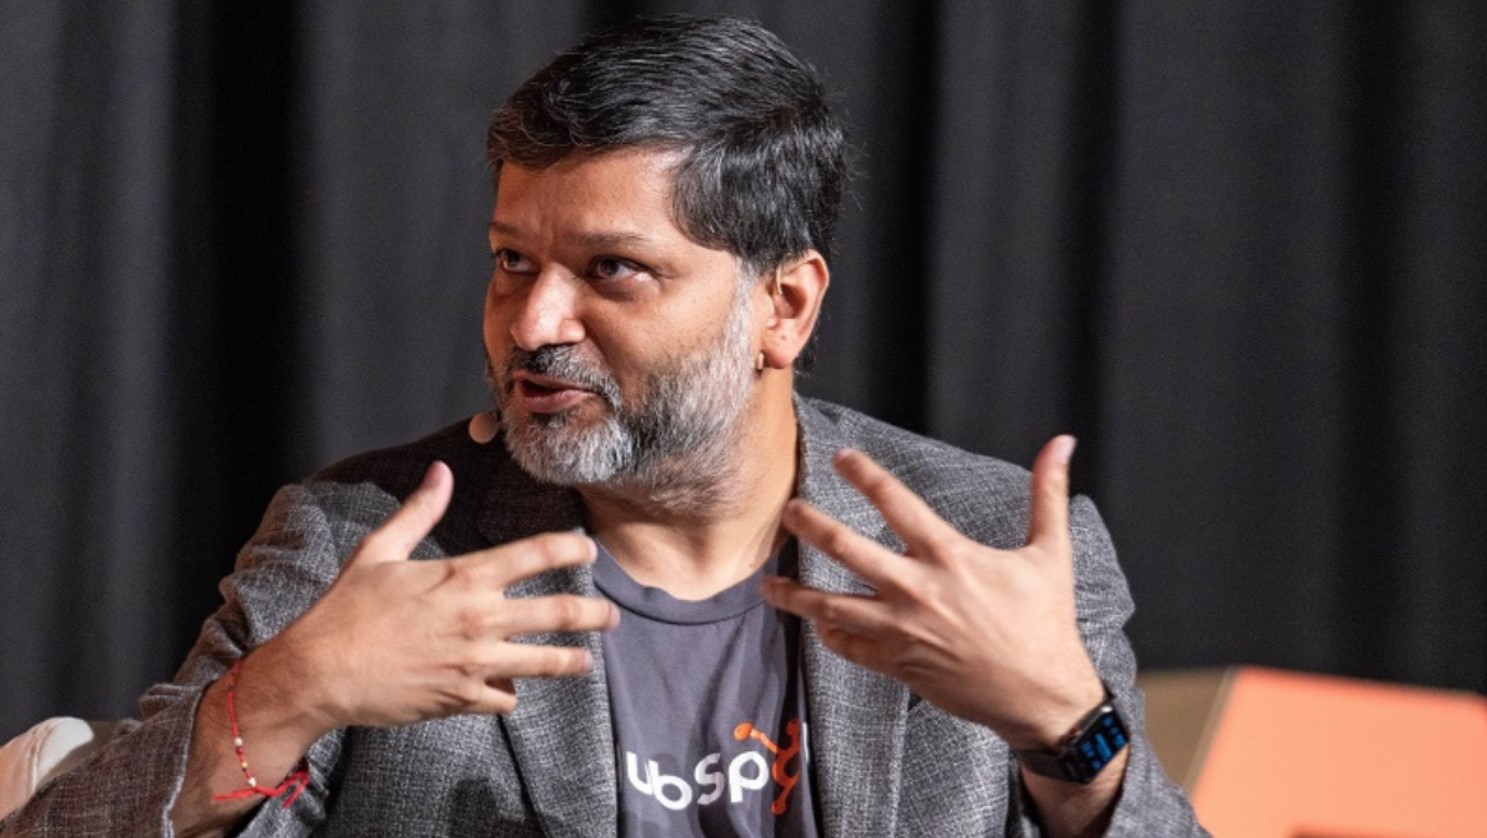 HubSpot Co-Founder Dharmesh Shah Purchases Chat.com Domain Name: A Strategic Move for the Future